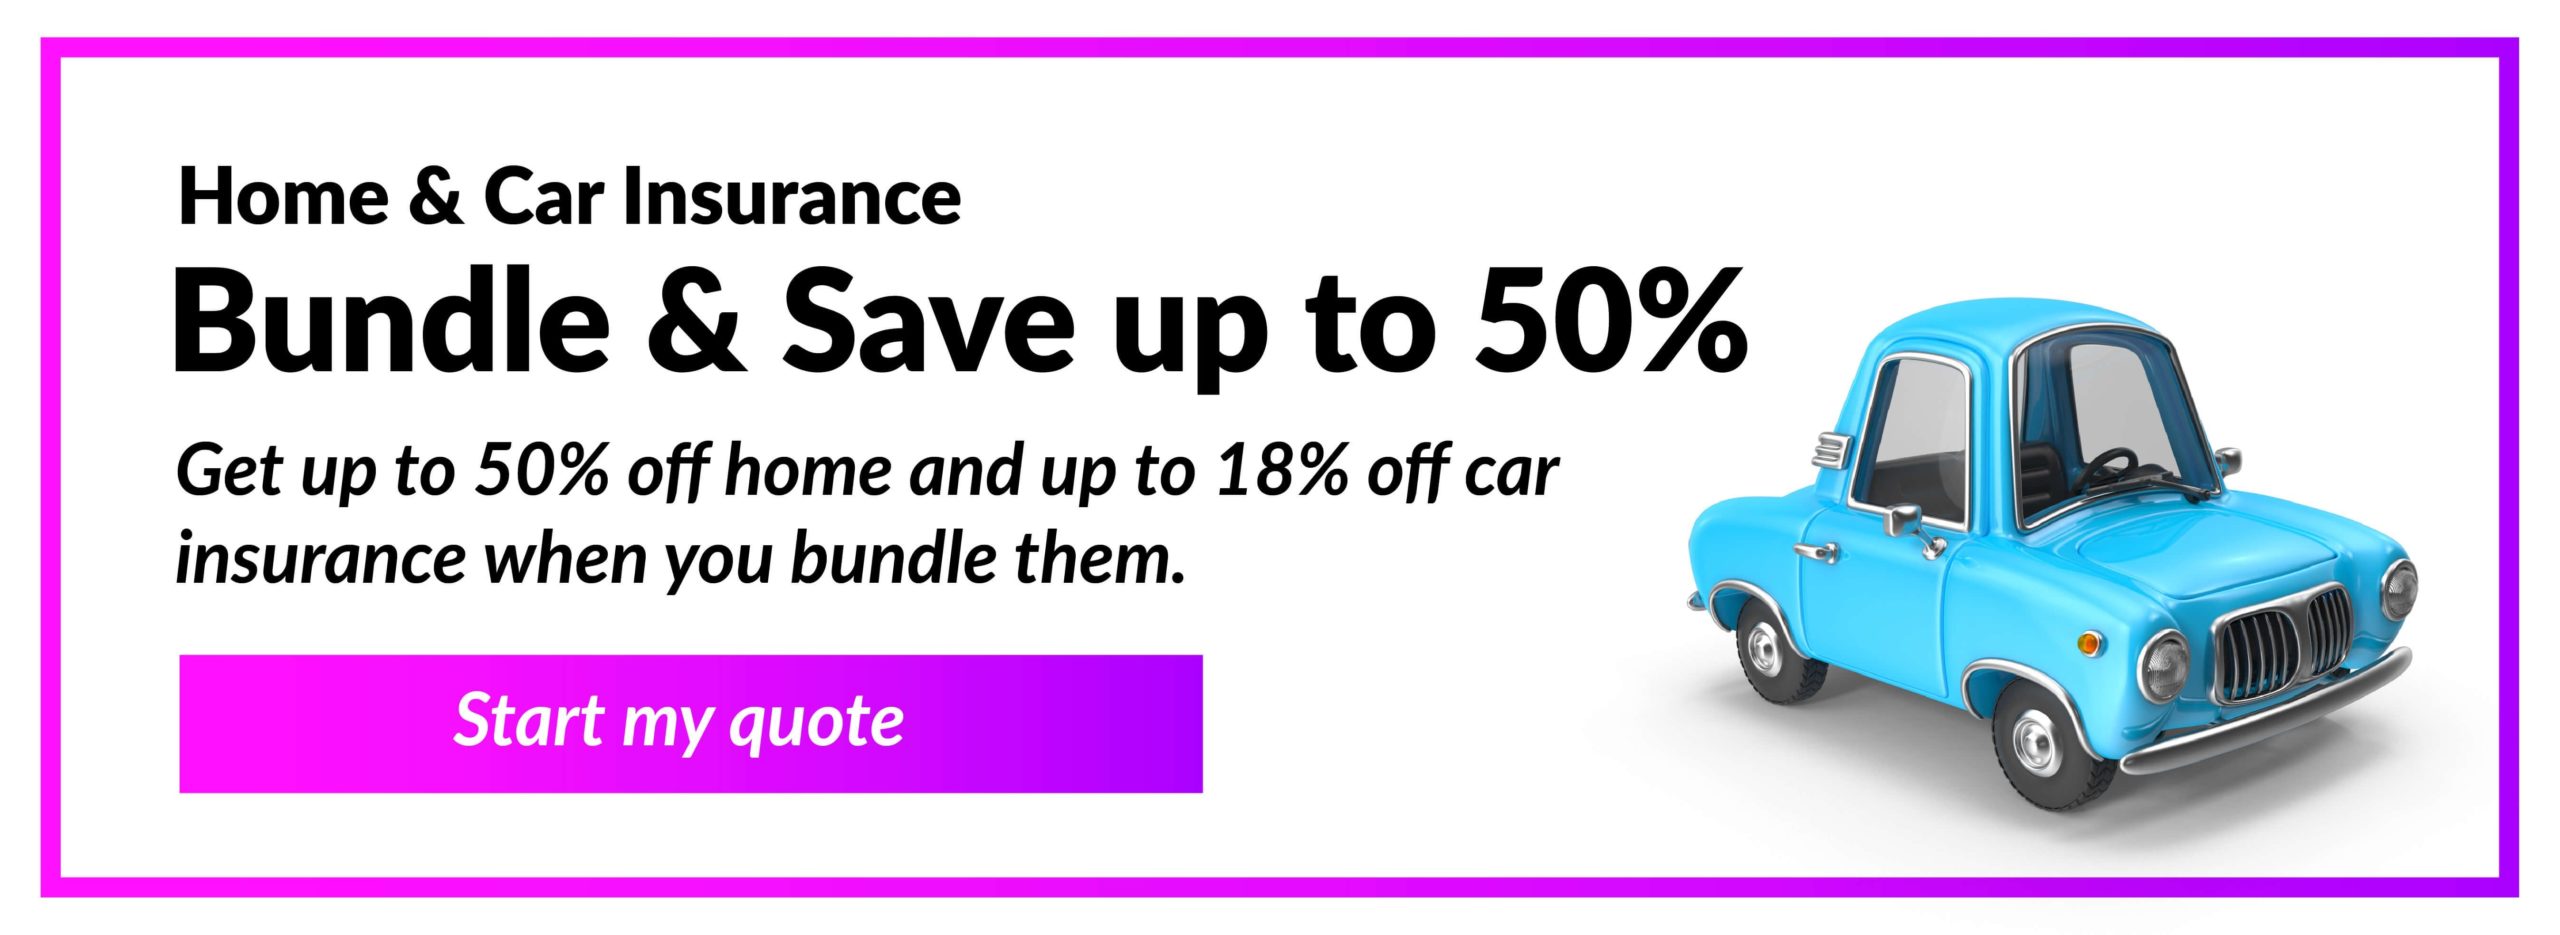 Home & Car Insurance - Bundle & Save up to 50% - Get up to 50% off home and up to 18% off car insurance when you bundle them. Start my quote